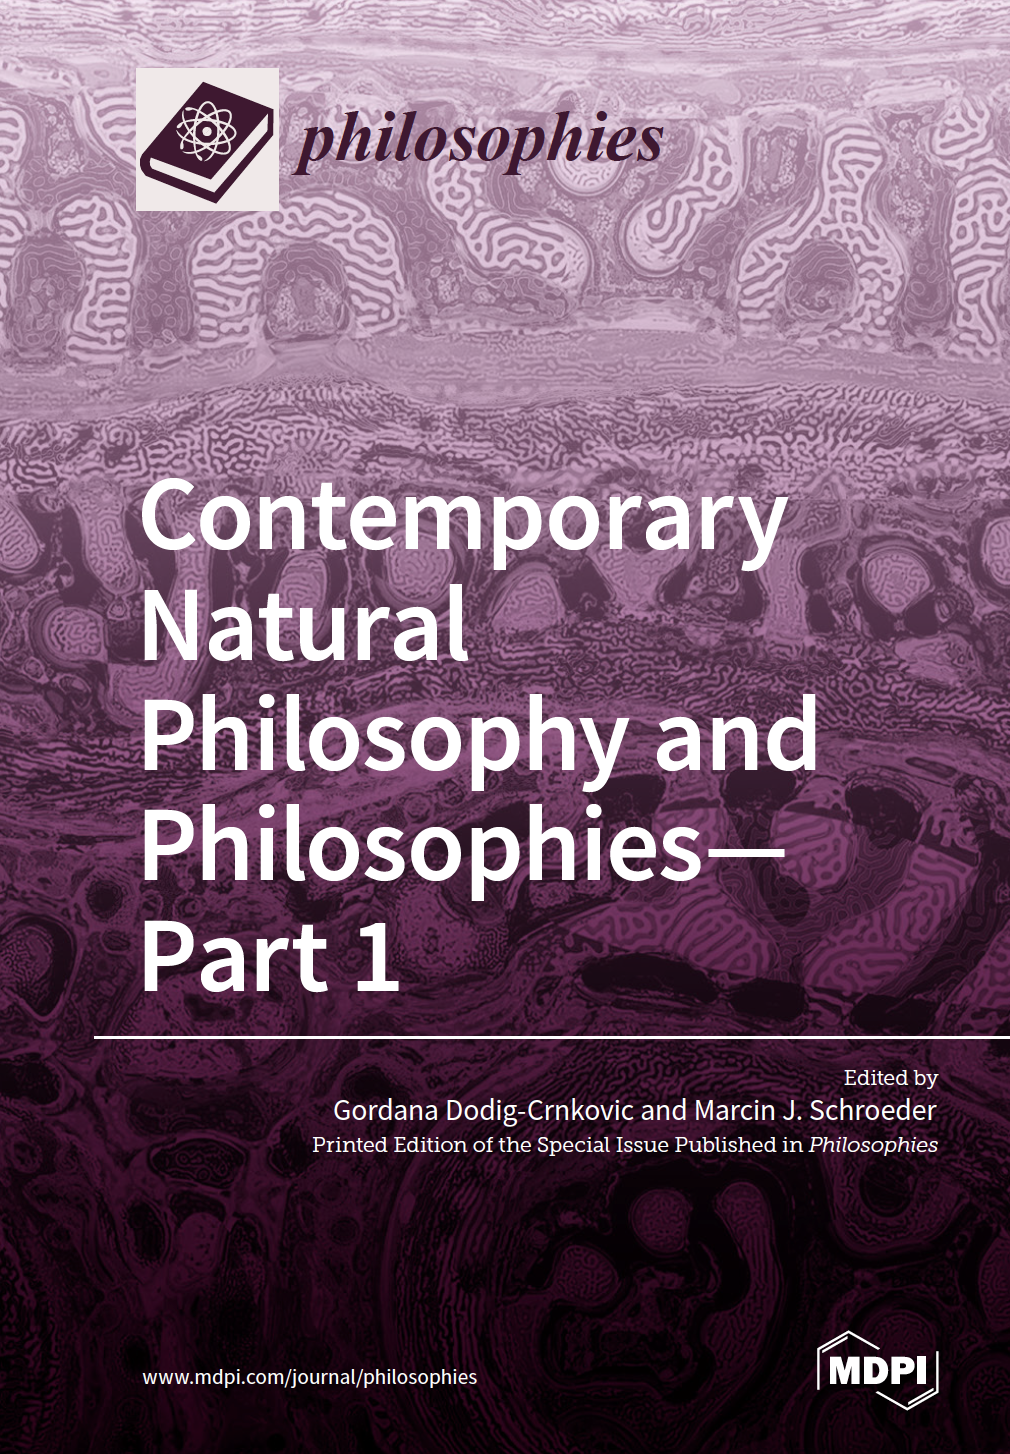 Contemporary Natural Philosophy Part 1